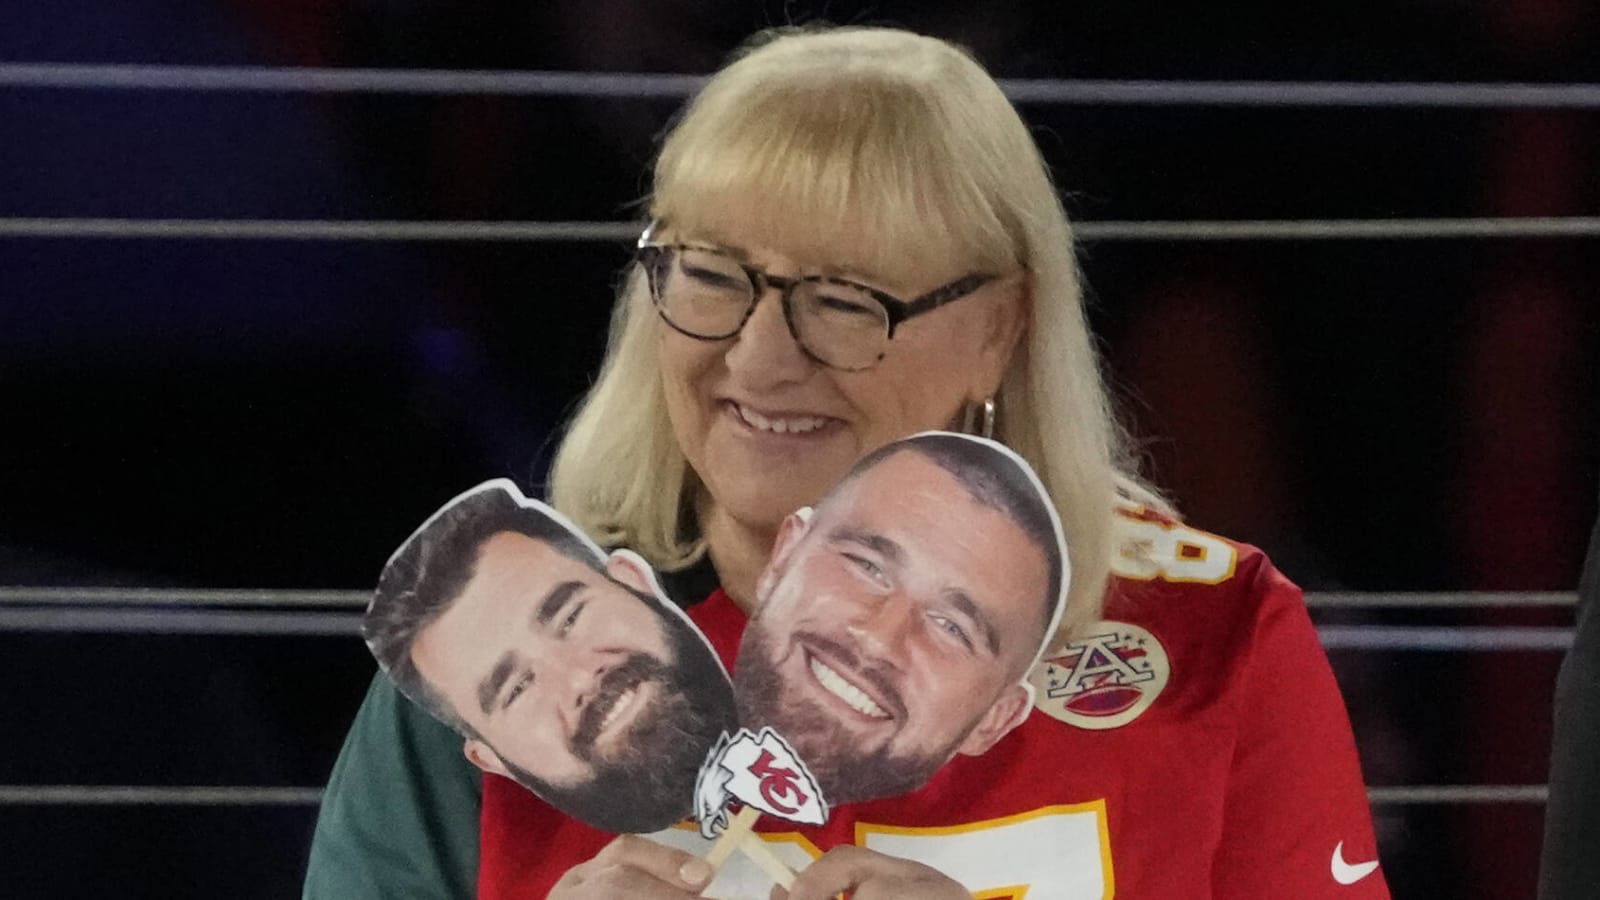 Donna Kelce shows support for both sons ahead of Super Bowl